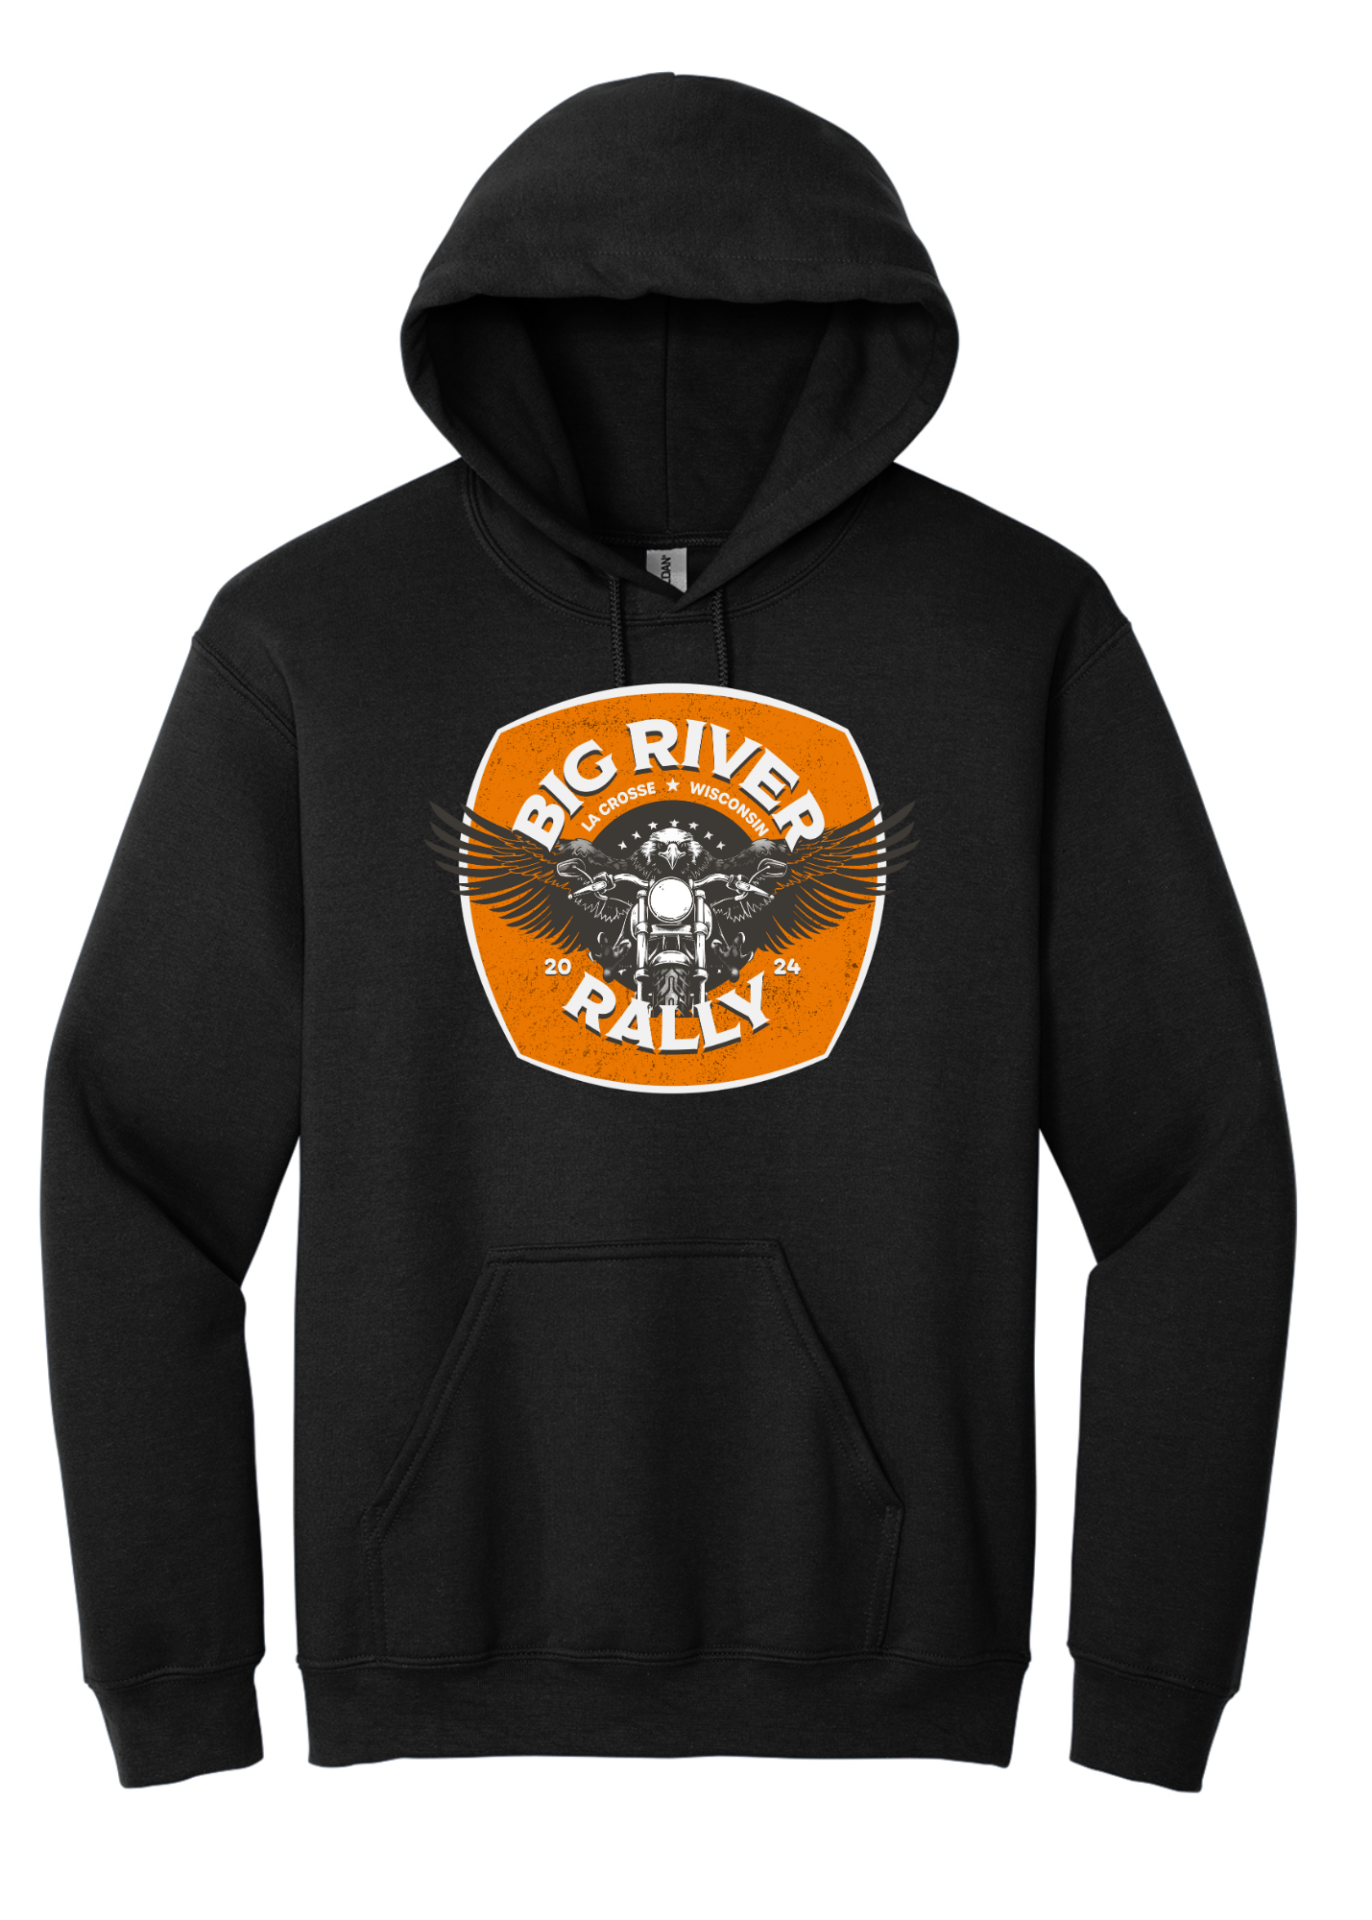 Black hoodies with a large Big River Rally logo on the full chest